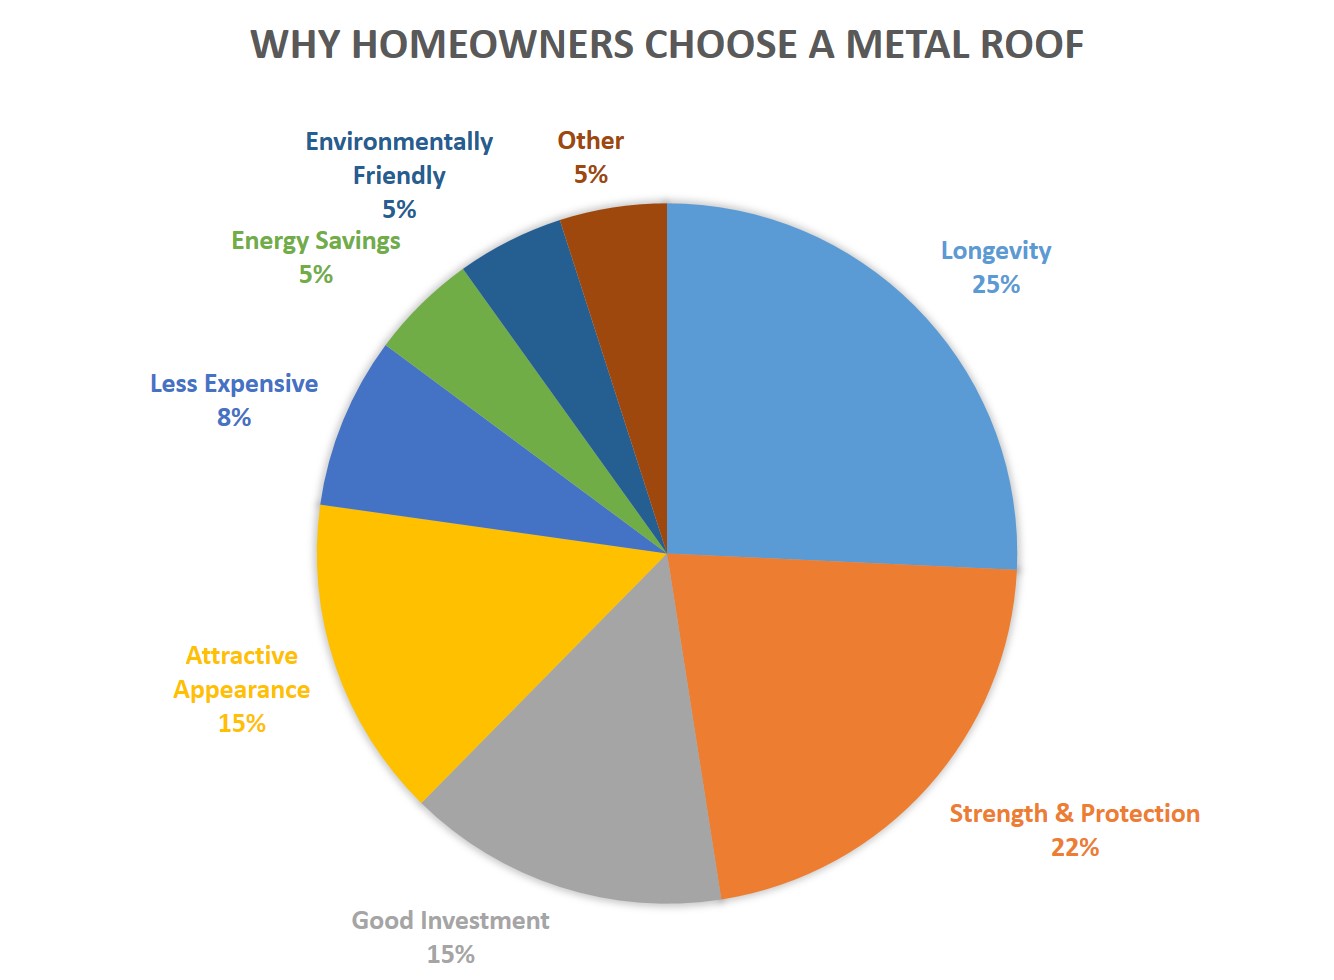 Why Homeowners Chose a Metal Roof